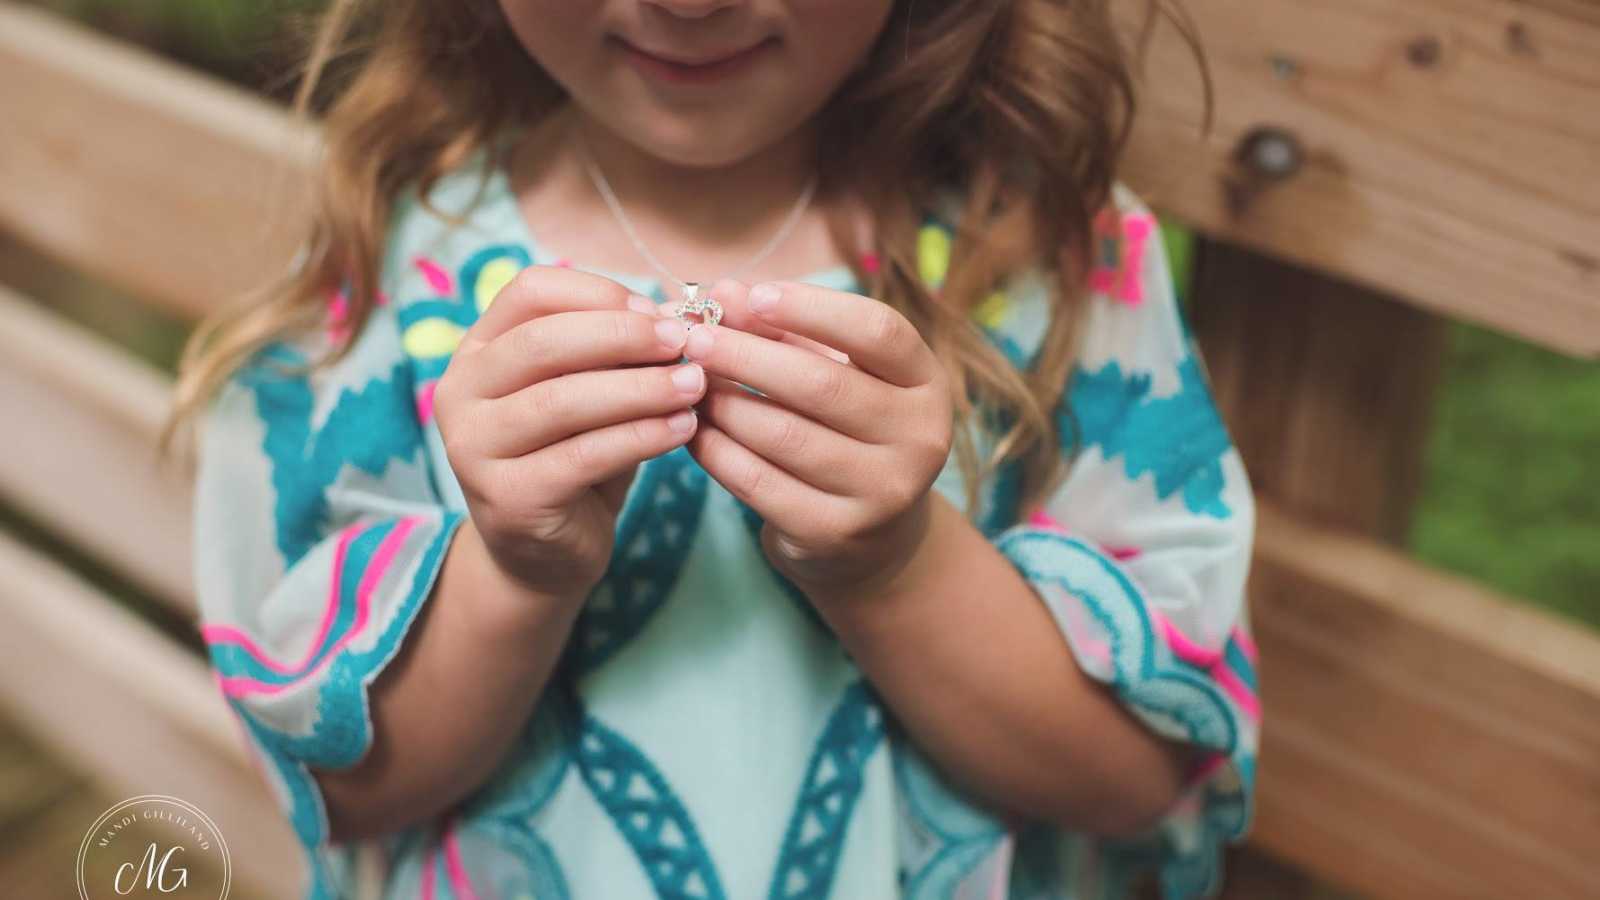 Toddler holds necklace mother's fiancee gave her at proposal